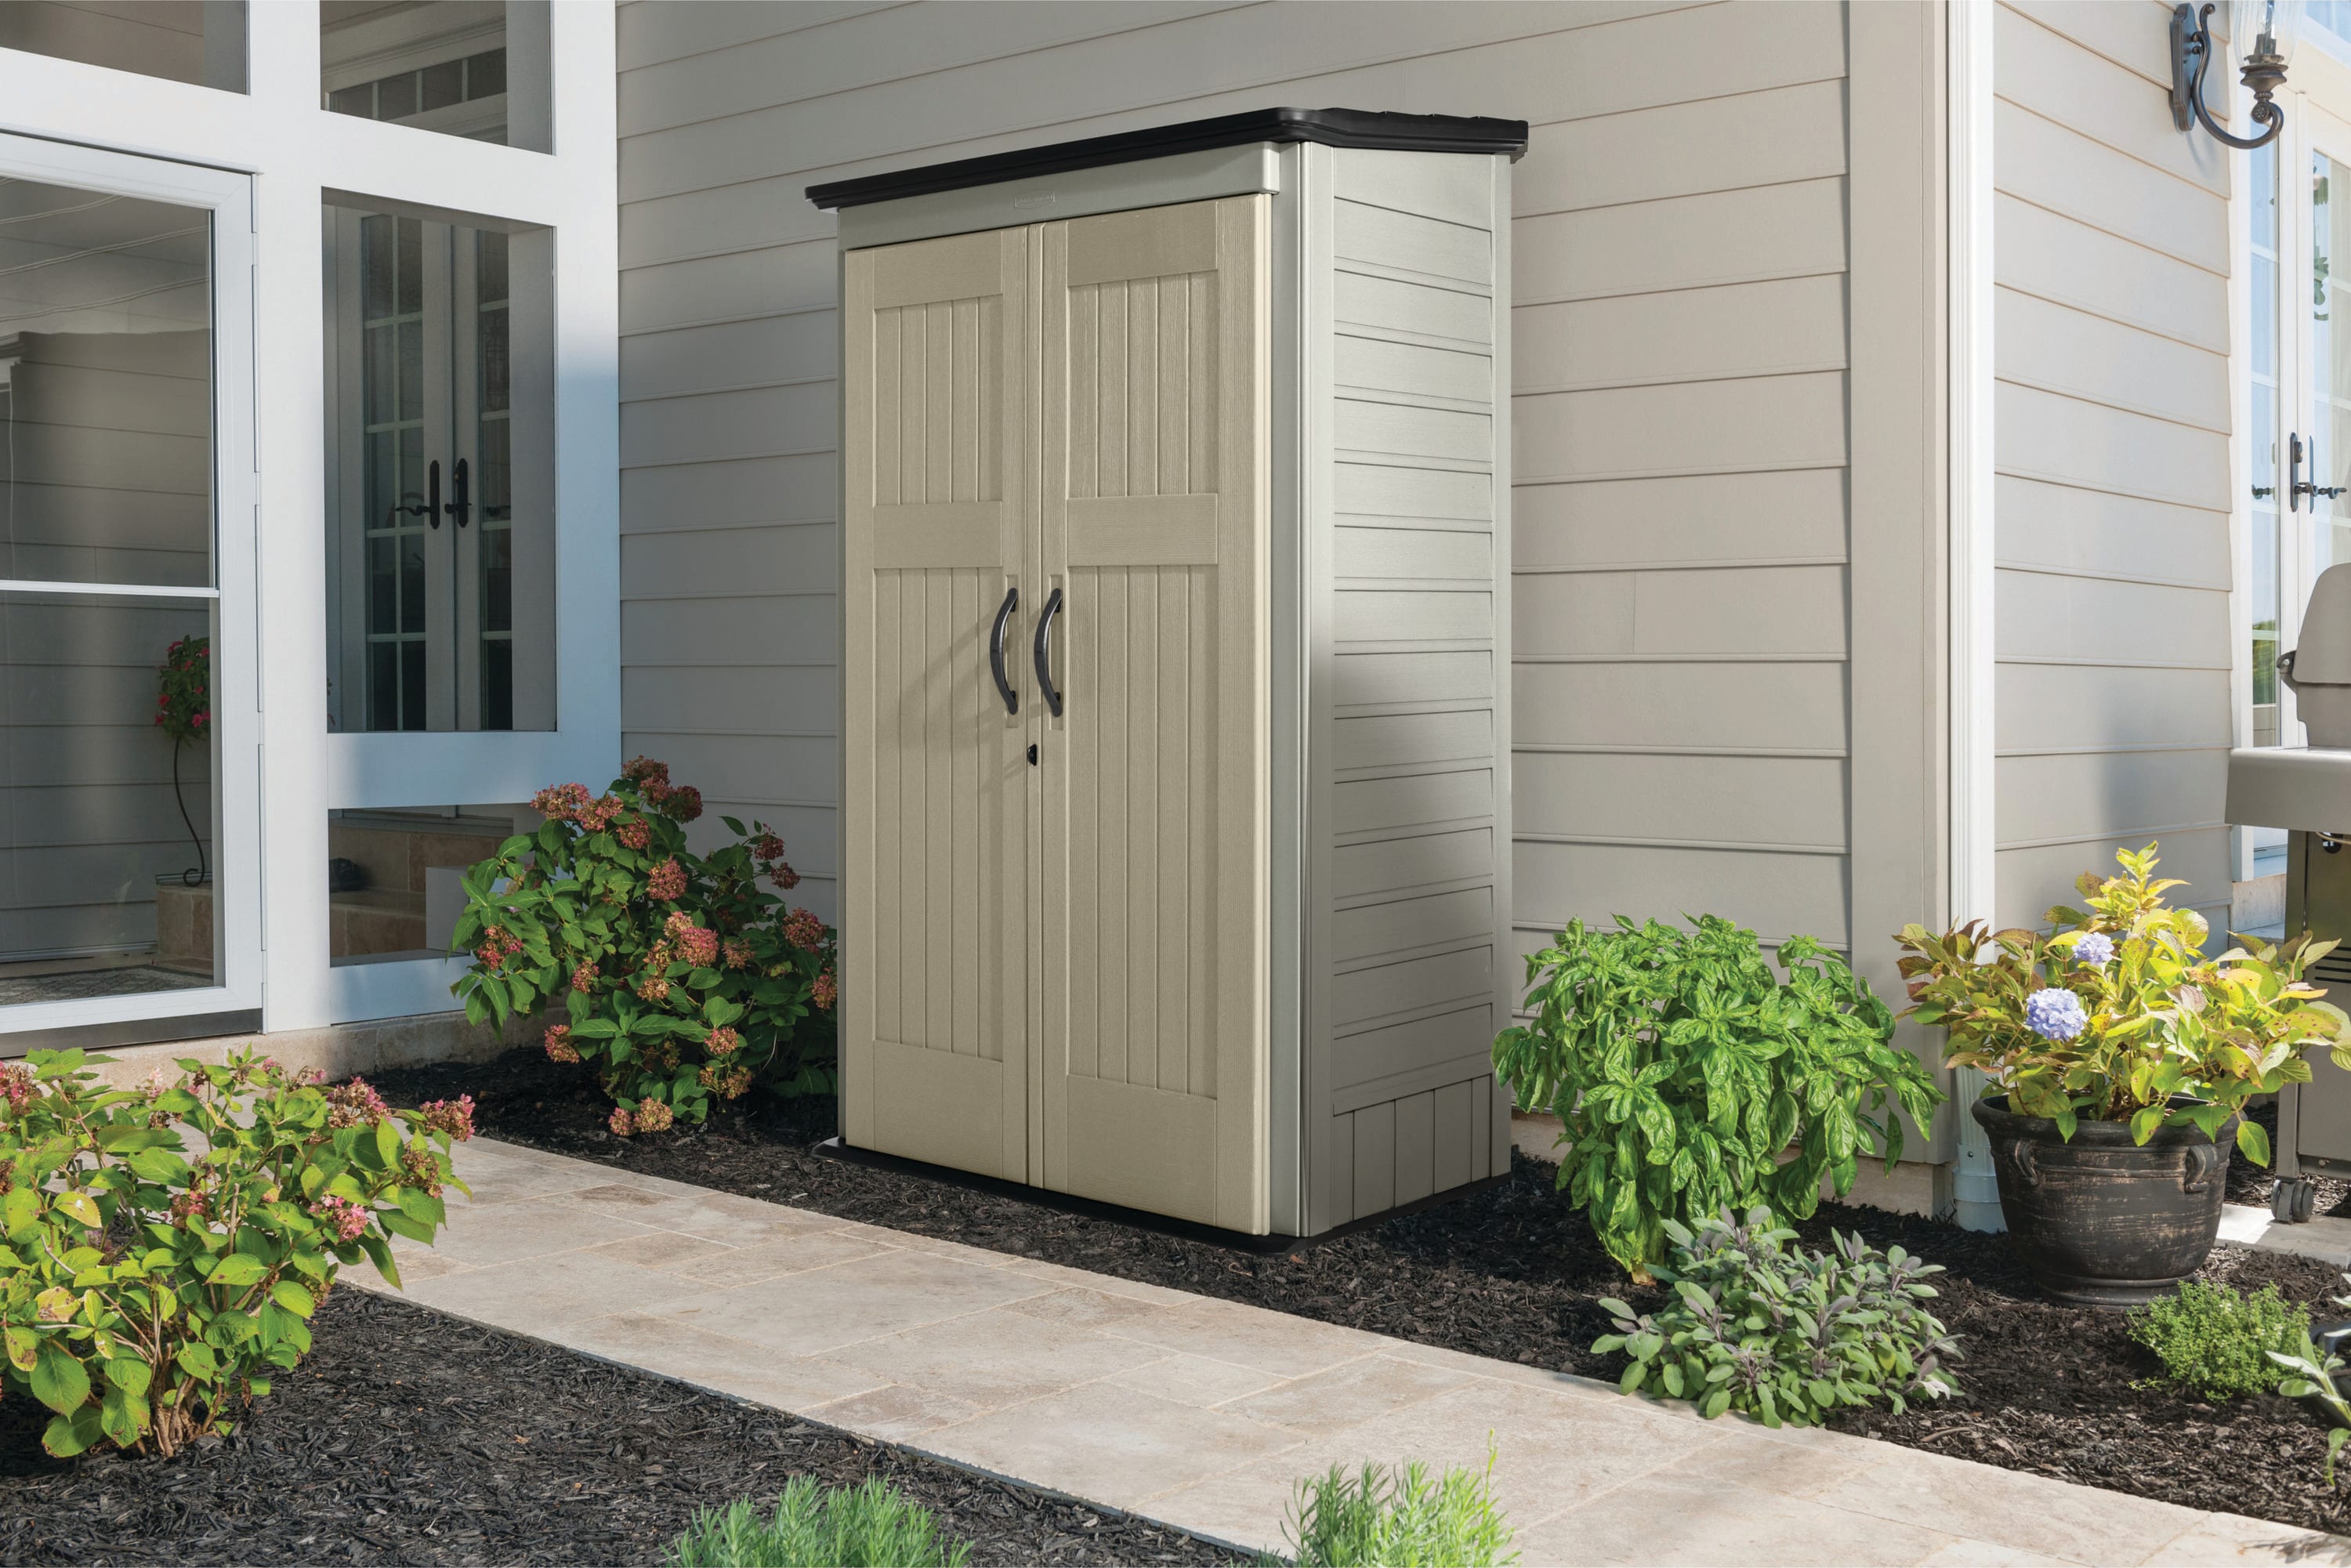 Rubbermaid 2 ft. 4 in. x 4 ft. 8 in. Small Vertical Resin Storage Shed  1967660 - The Home Depot